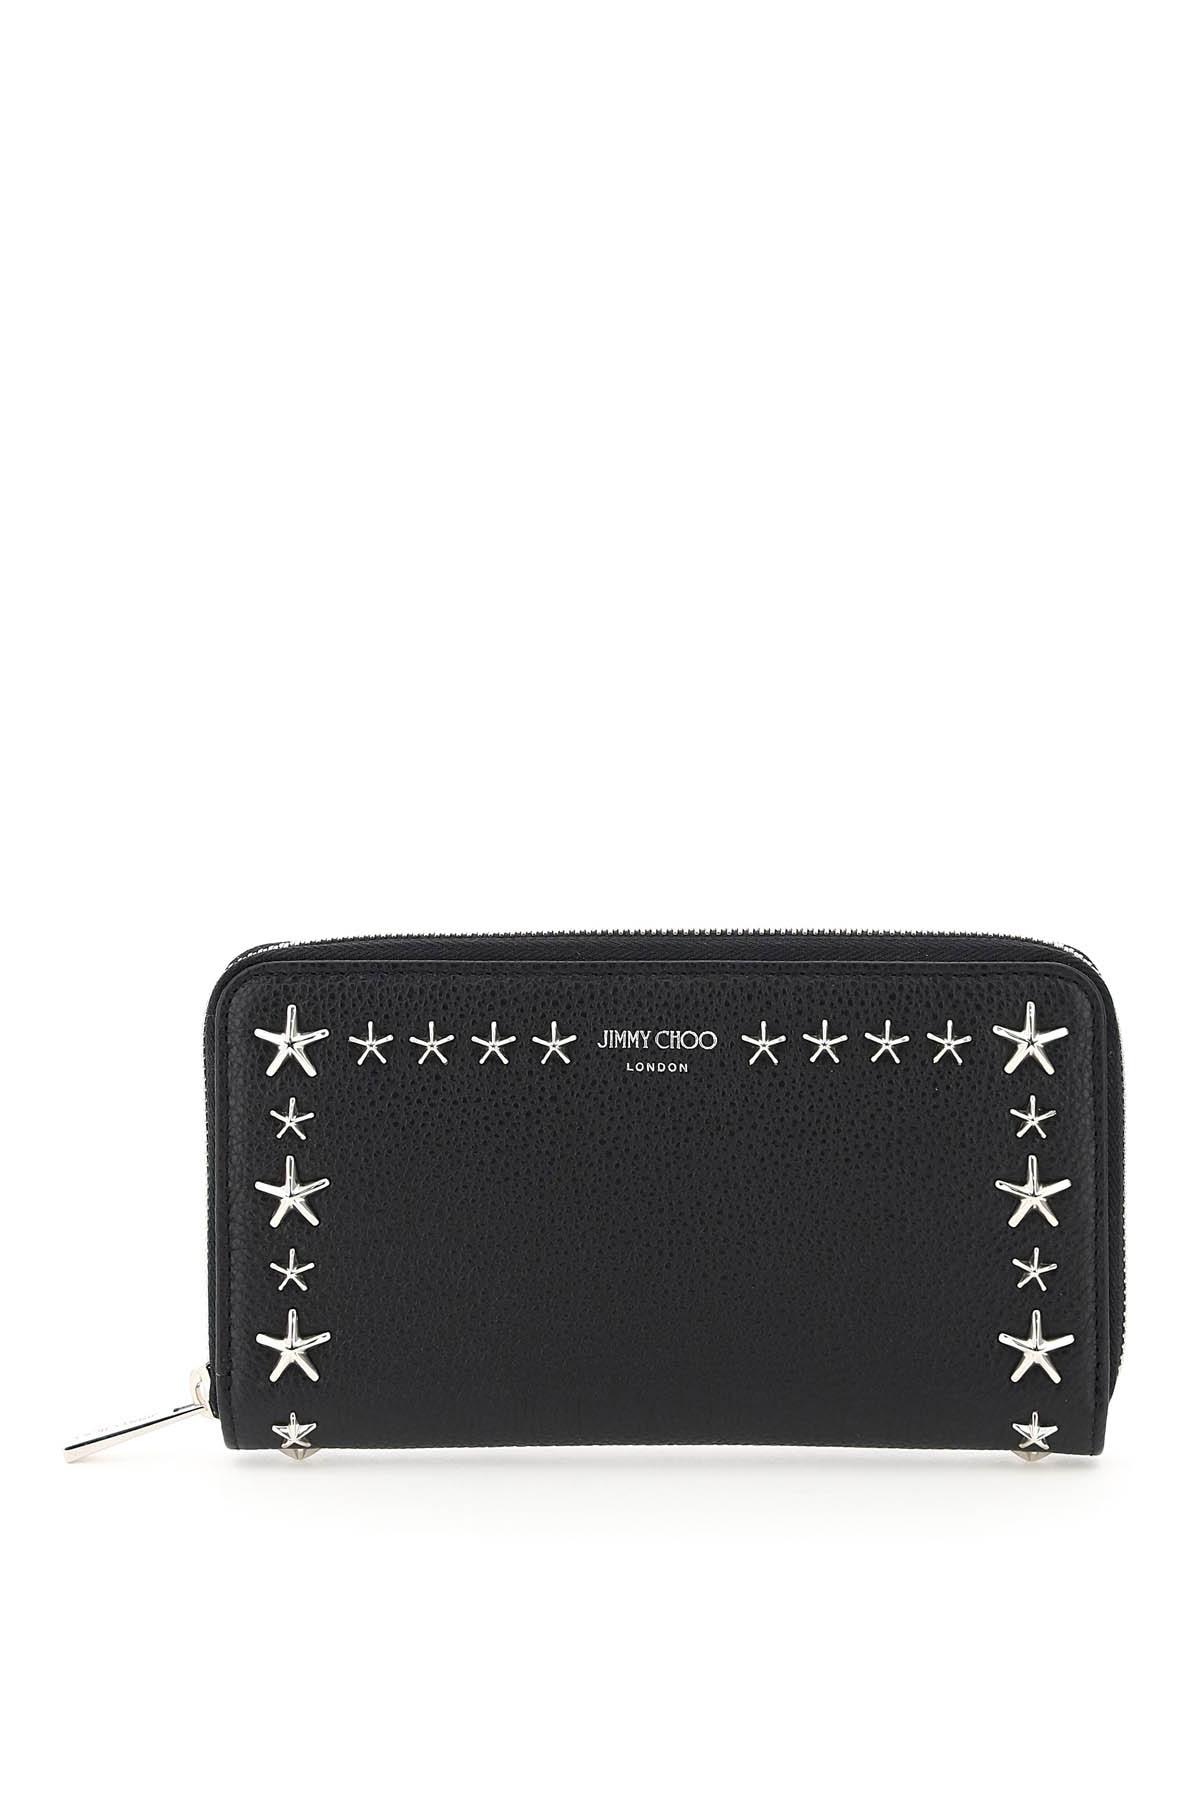 Jimmy Choo Zip Around Star Studs Wallet Os Leather in Black - Lyst